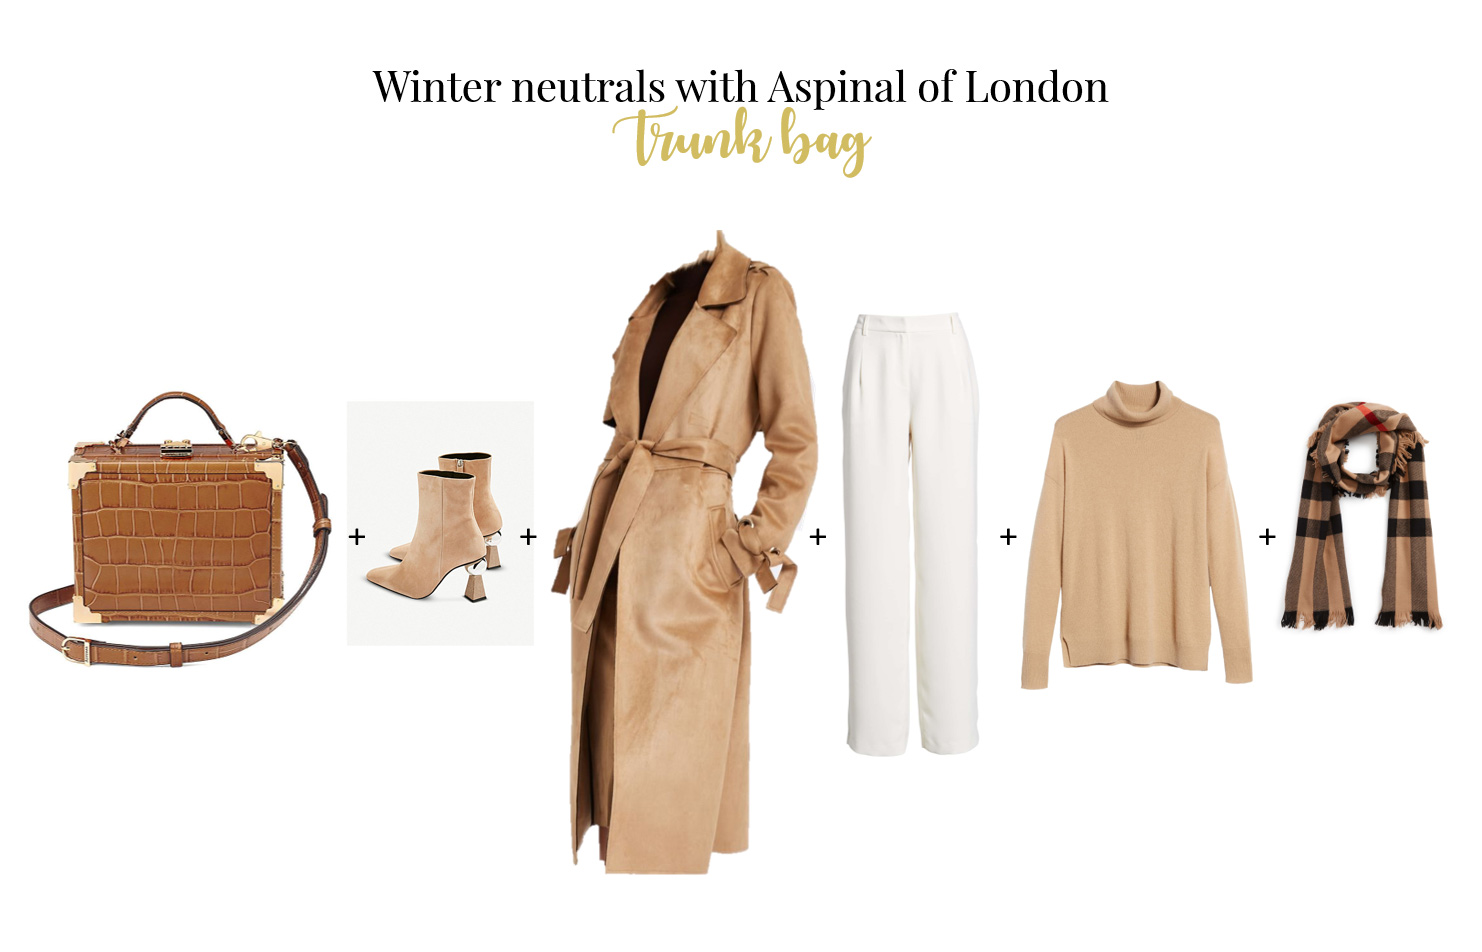 How to wear trunk bag for work Aspinal of London bag faux suede coat